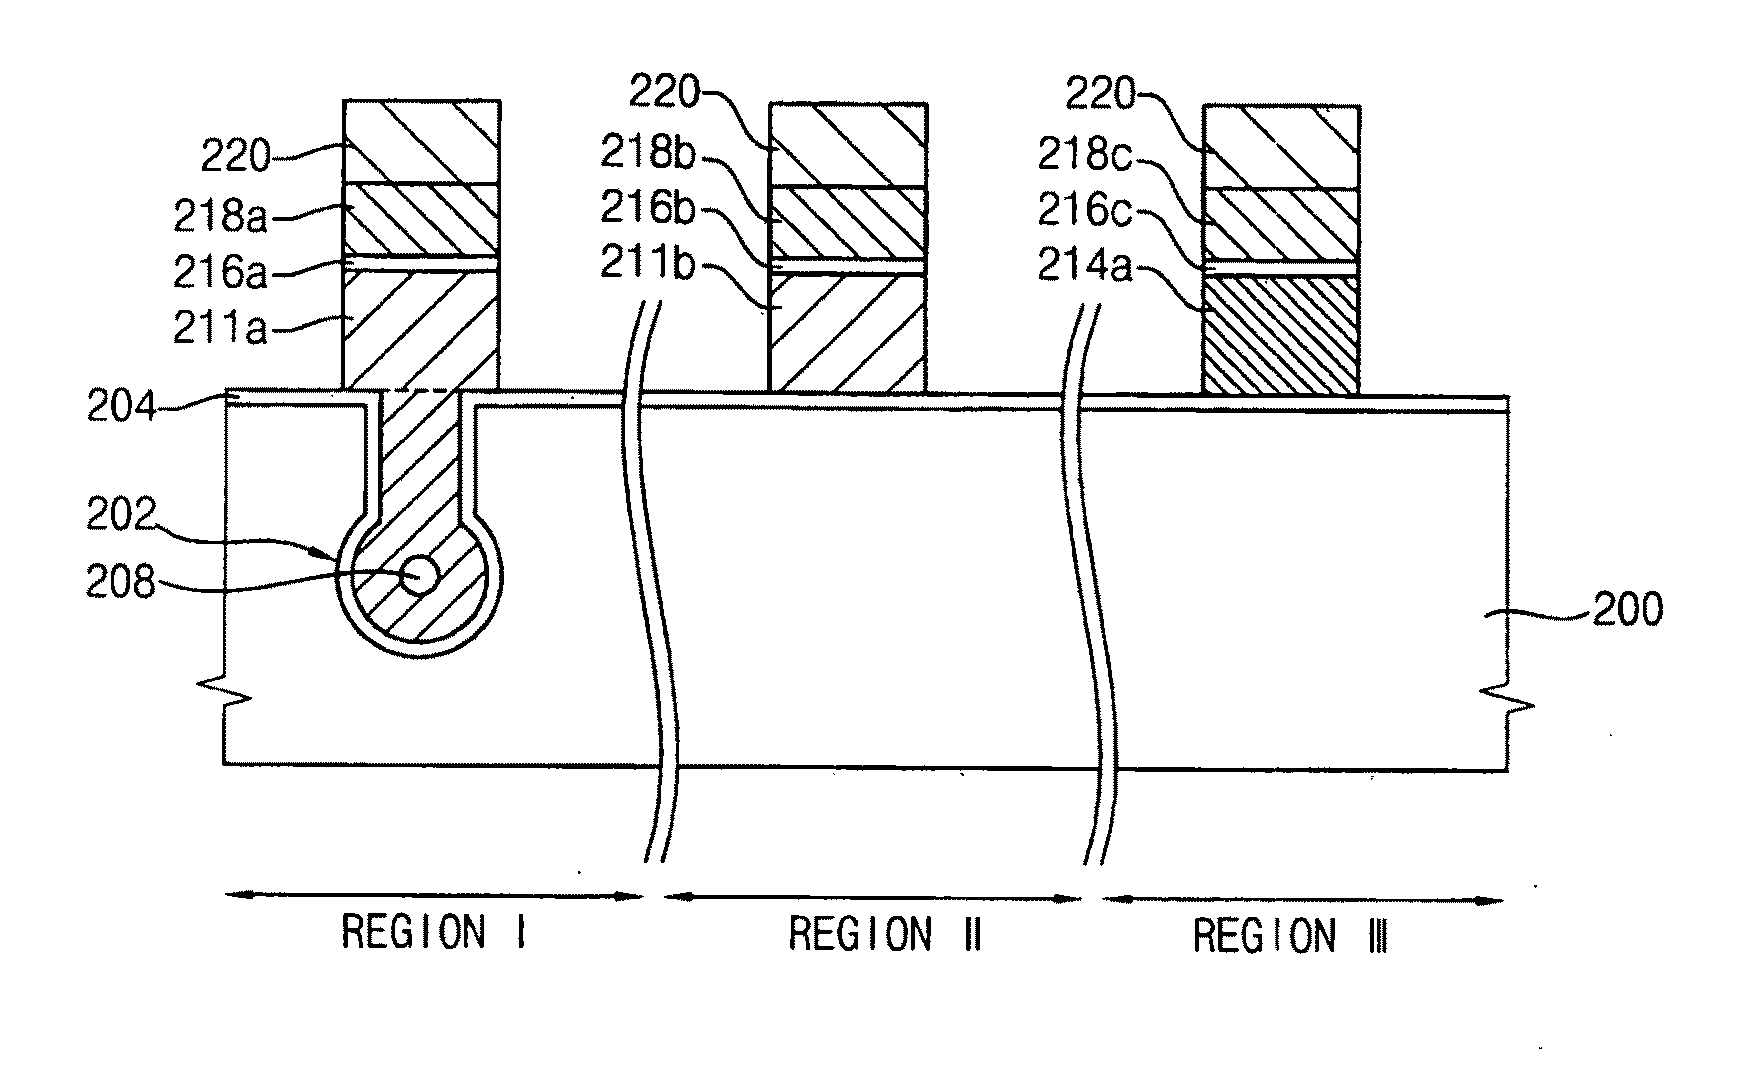 Gate of a transistor and method of forming the same